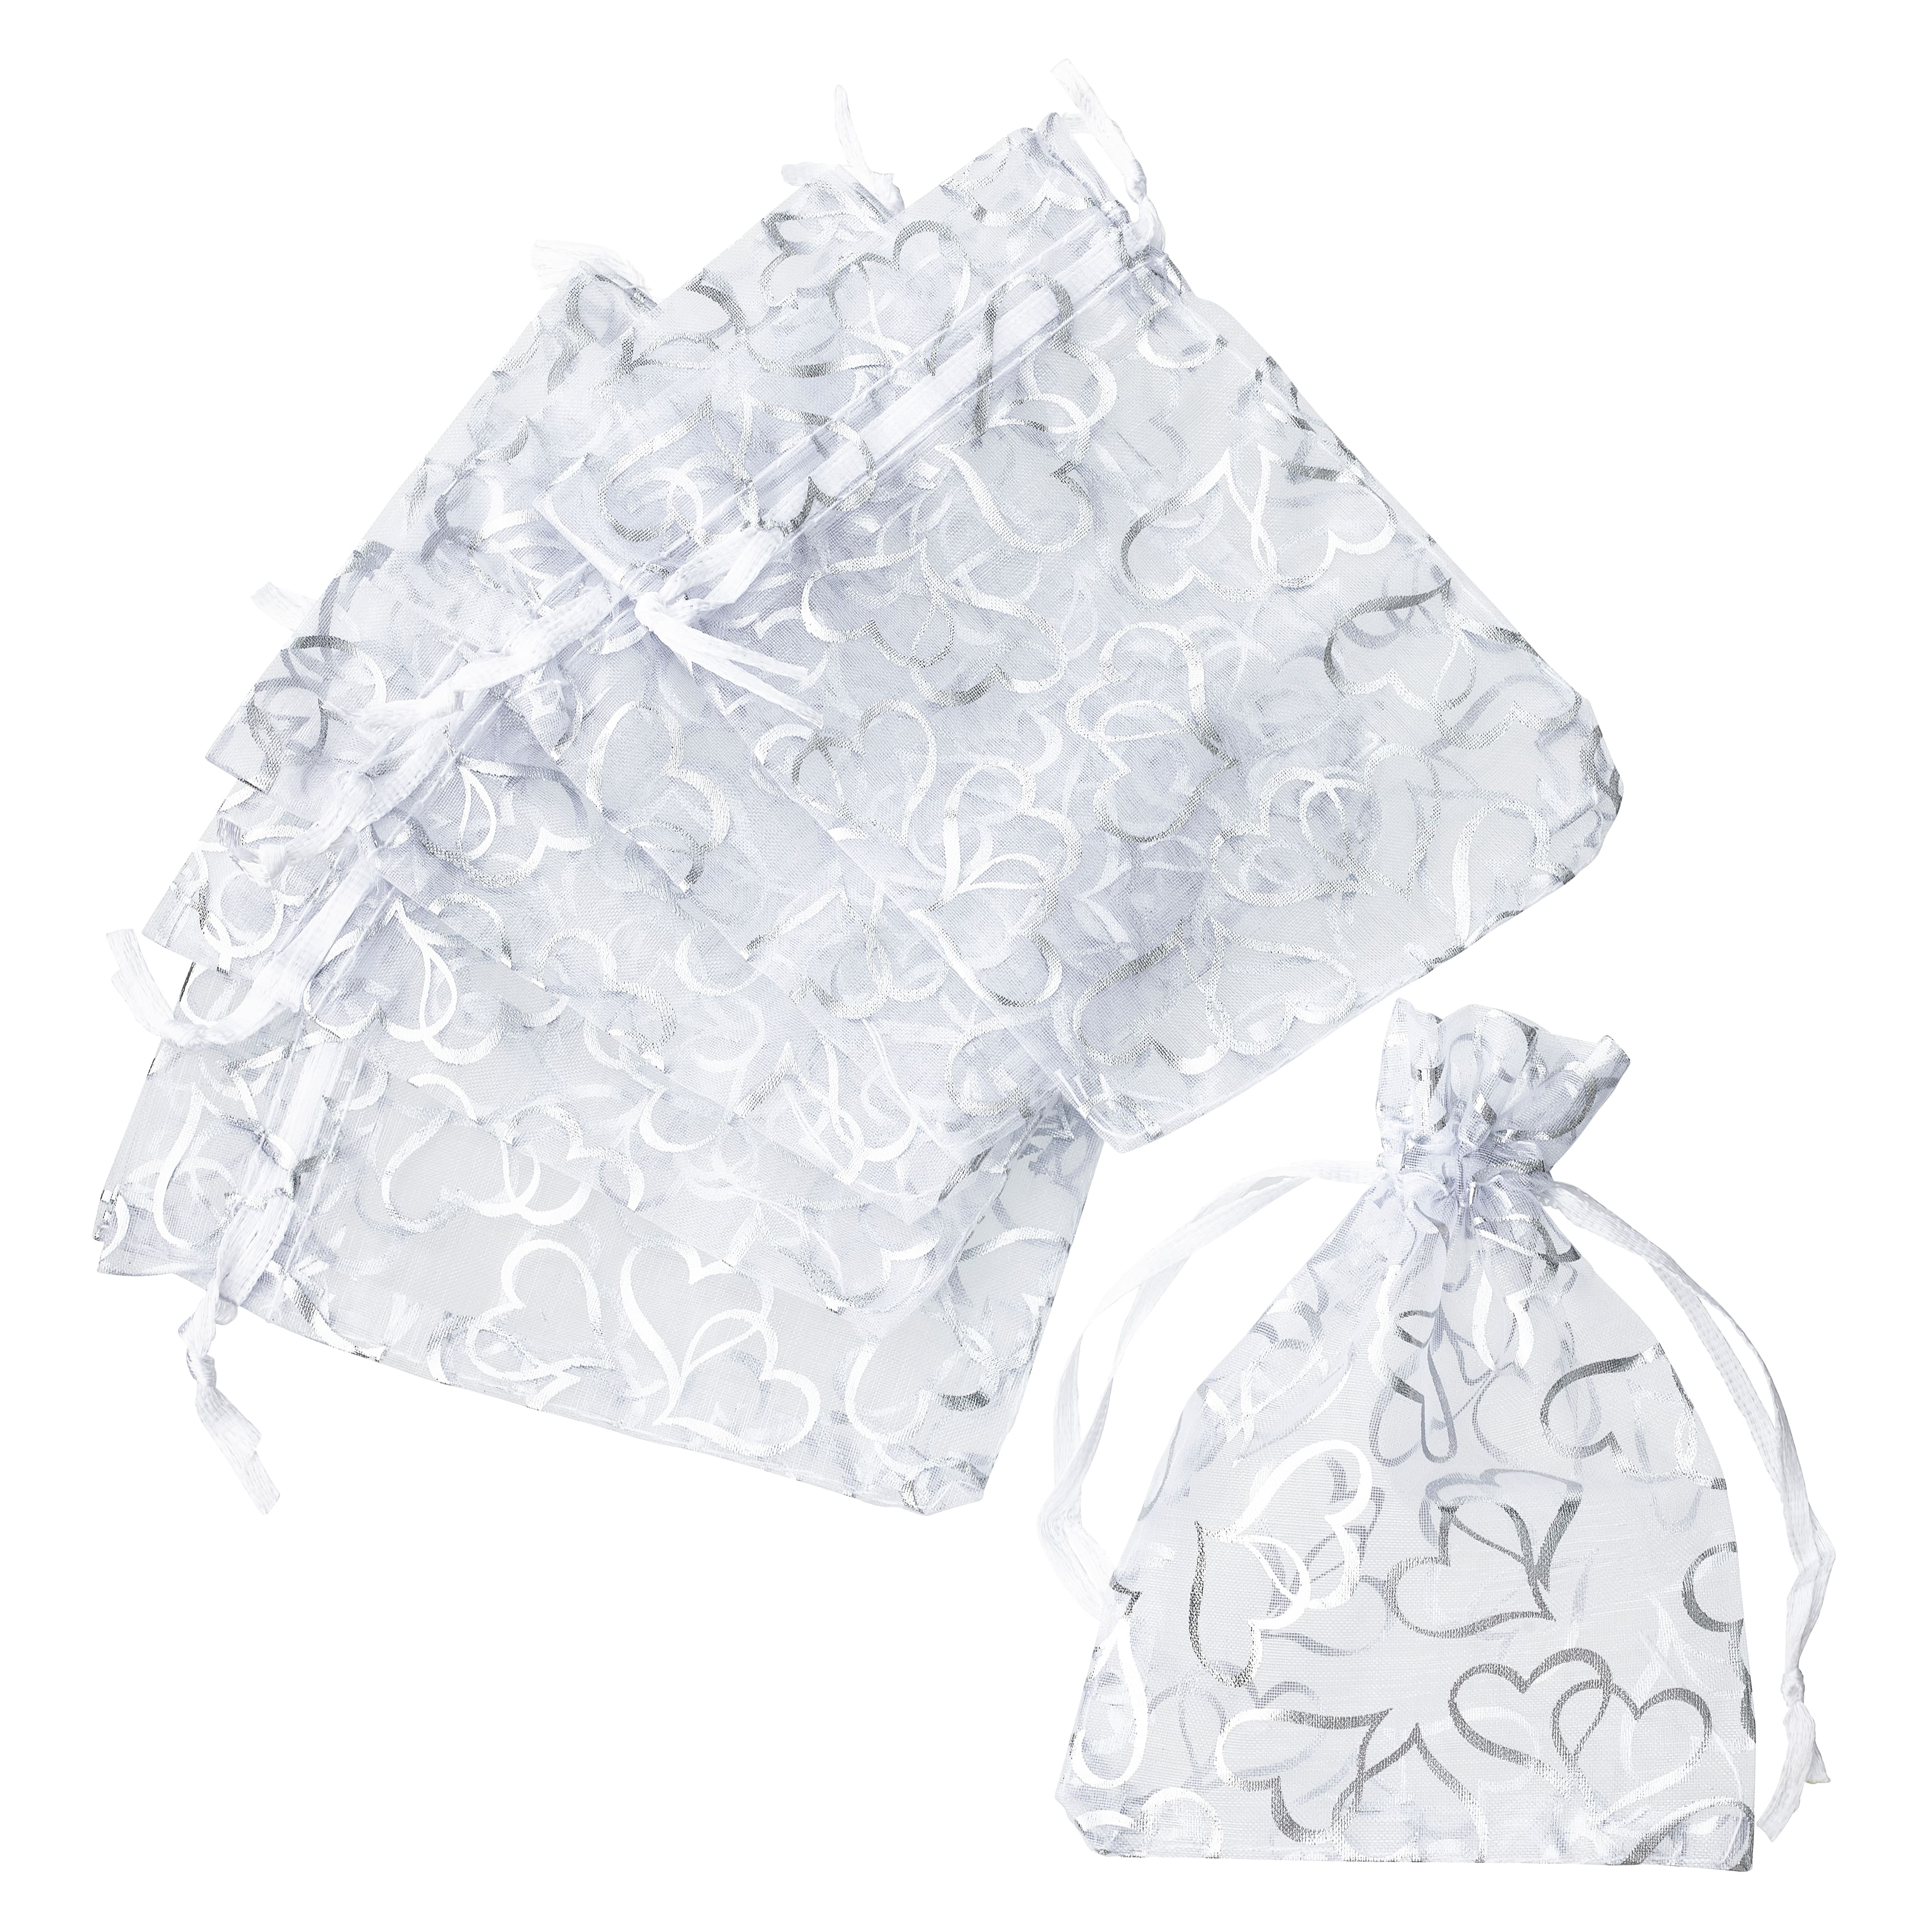 12 Packs: 12 ct. (144 total) Silver Double Heart Organza Favor Bags by Celebrate It&#x2122; Occasions&#x2122;